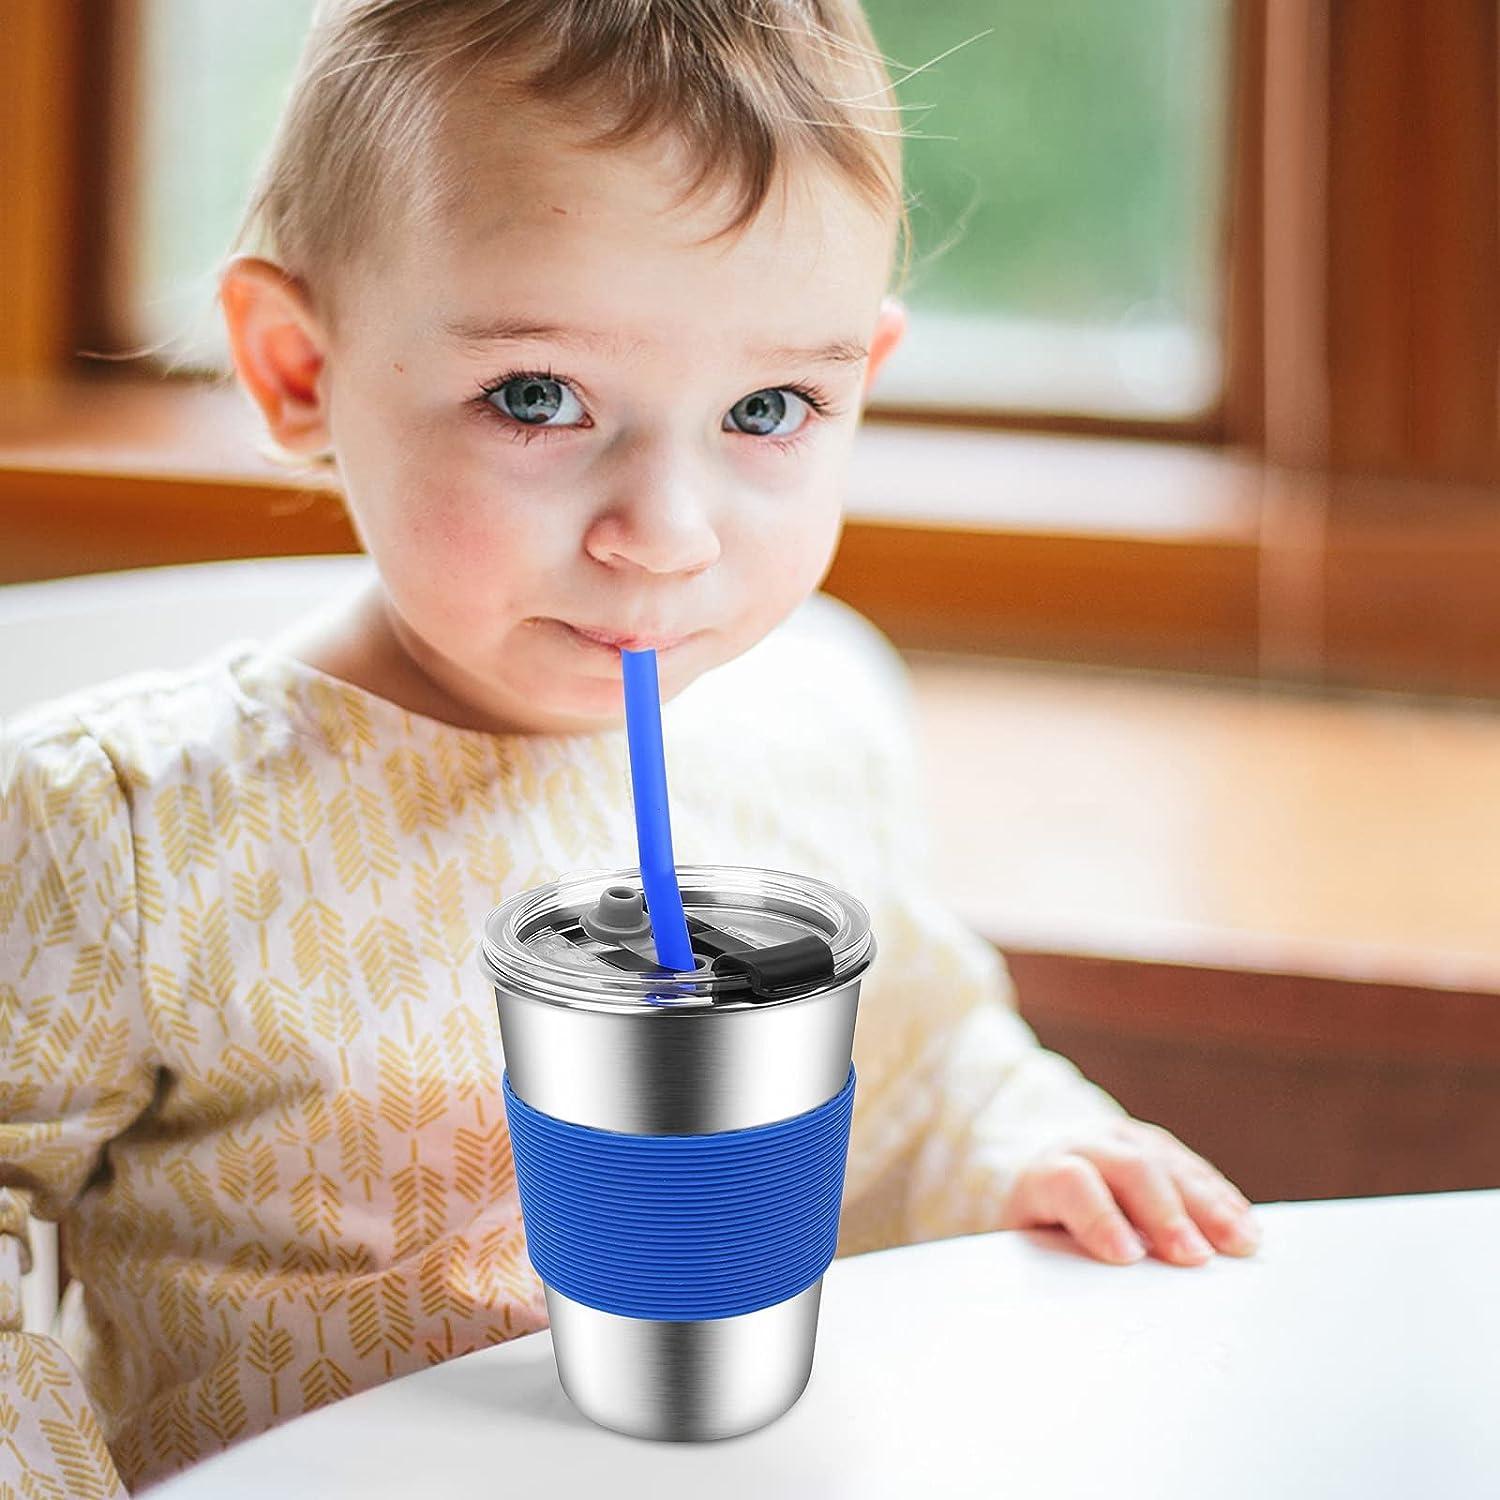  Vermida Kids Tumbler with Straw and Lid, 4 Pack 8oz